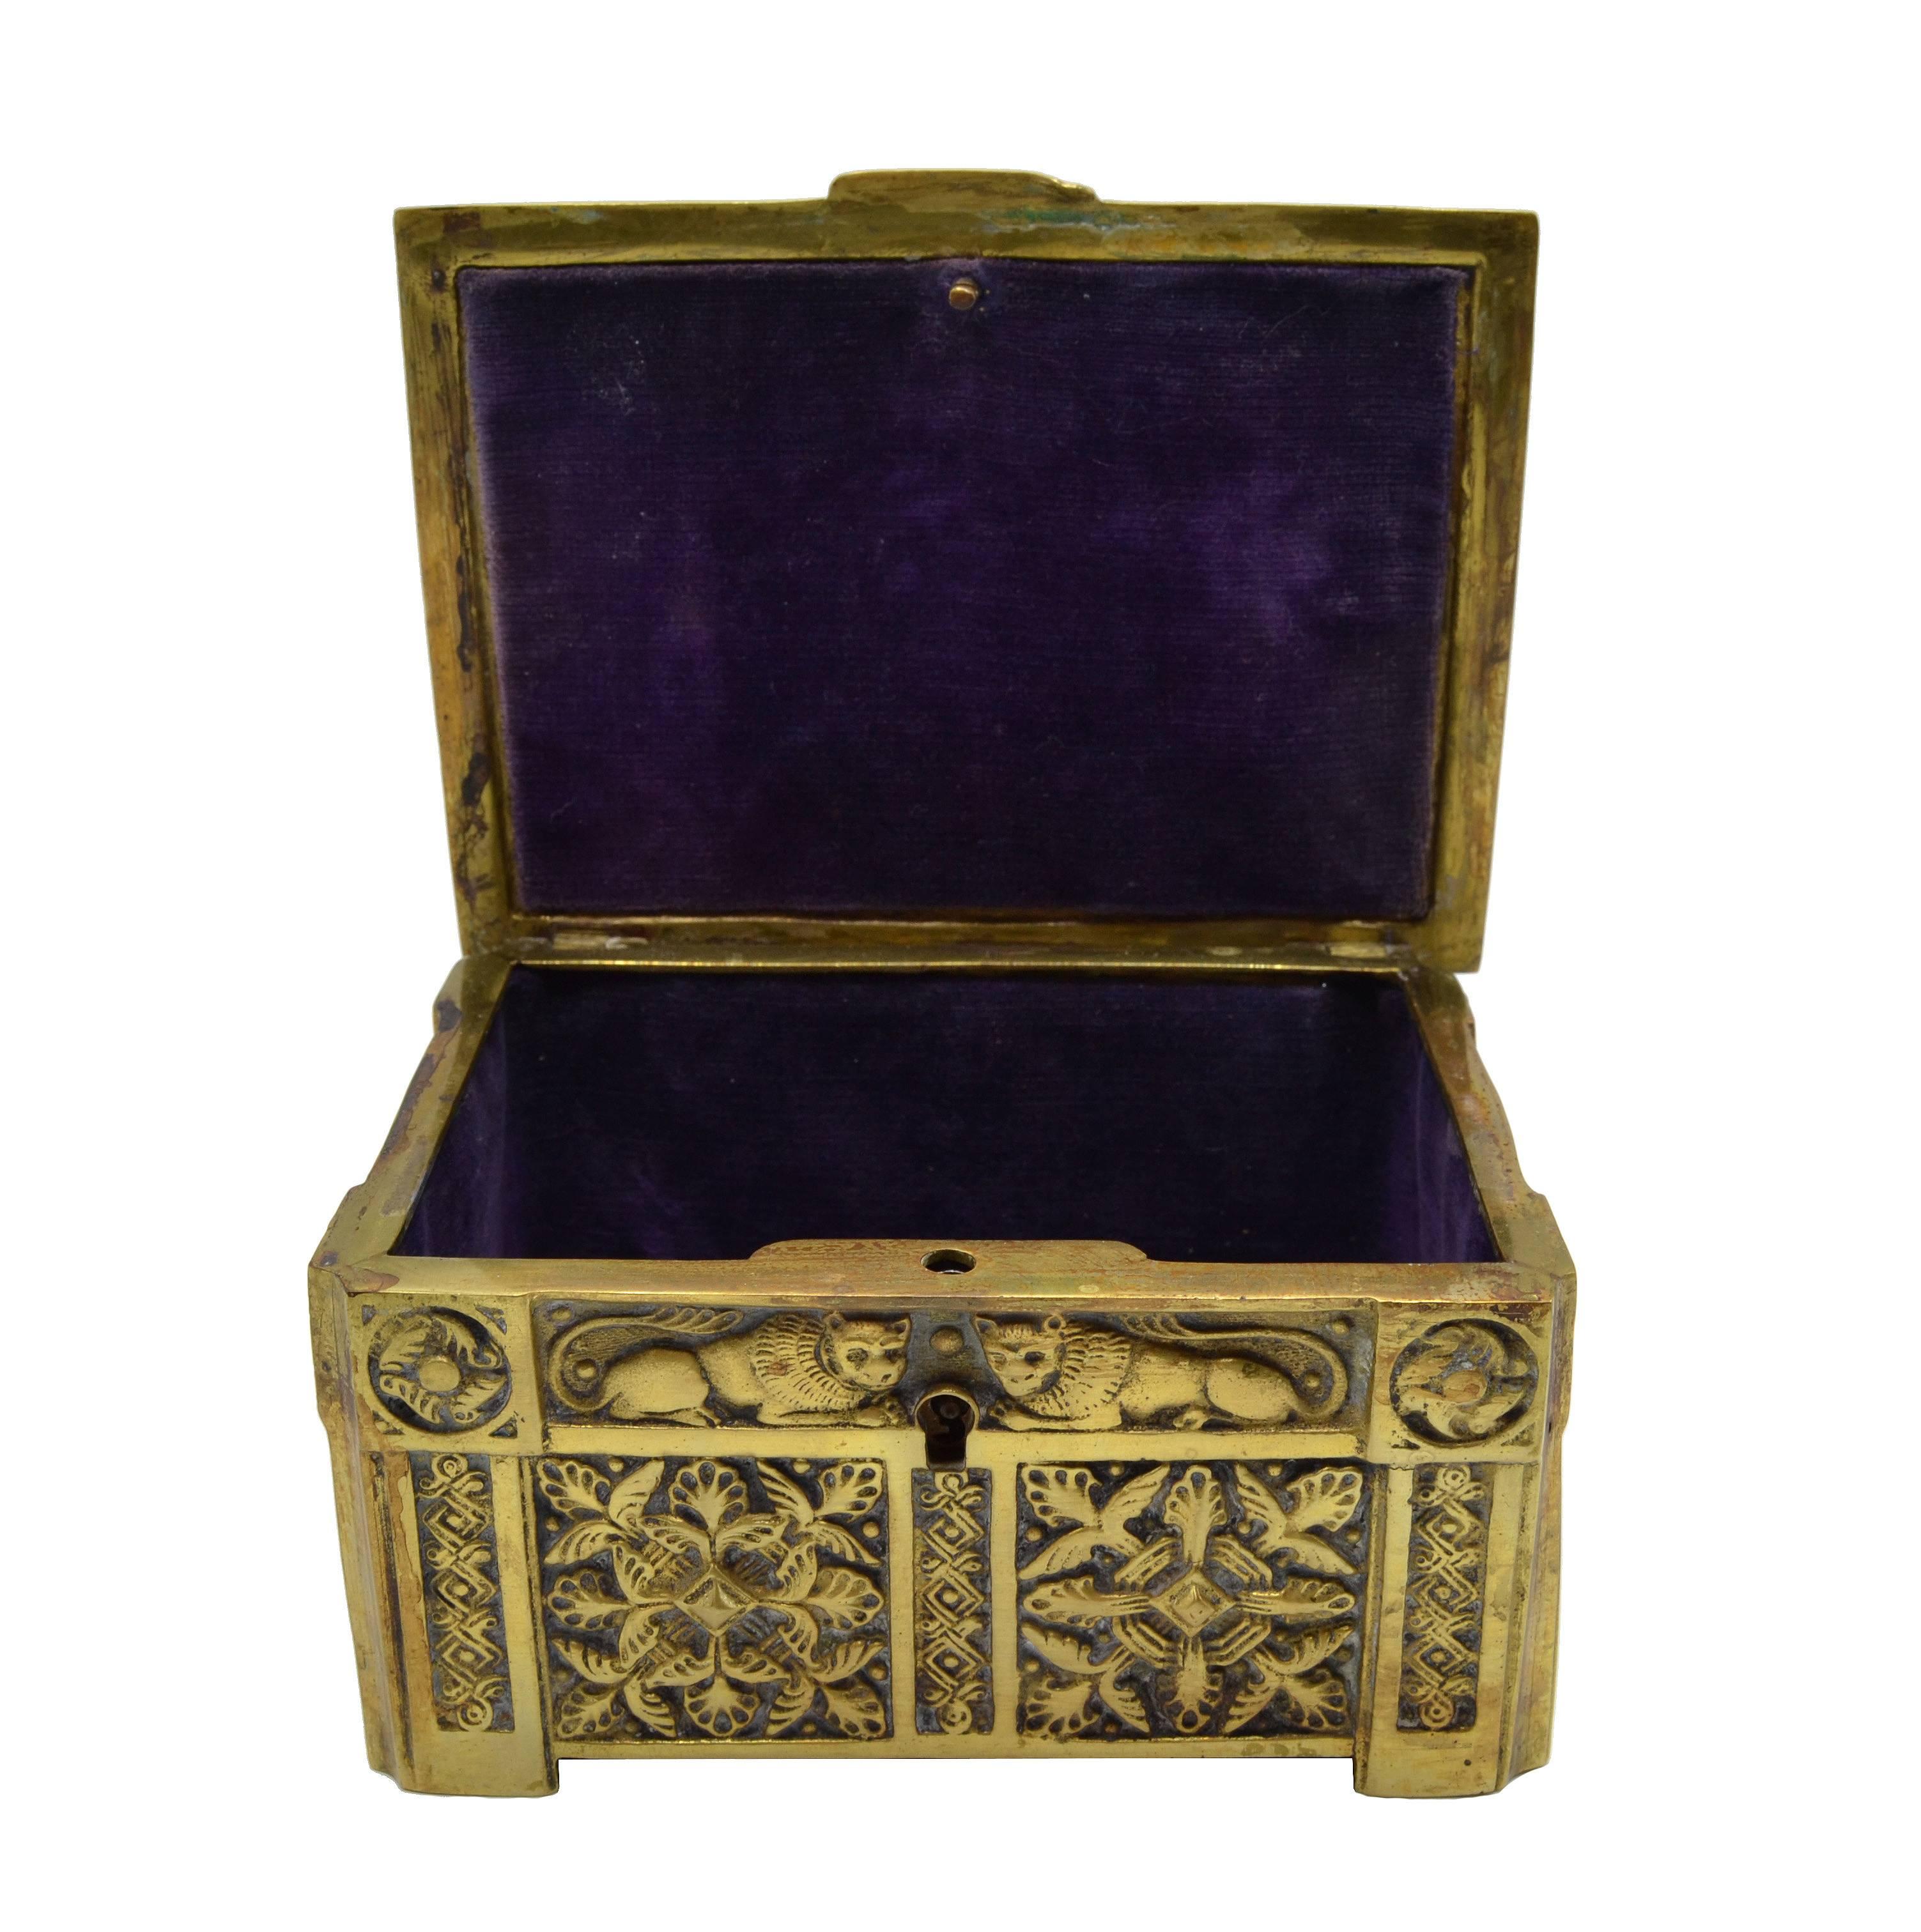 a small bronze box with engravings carried at the waist